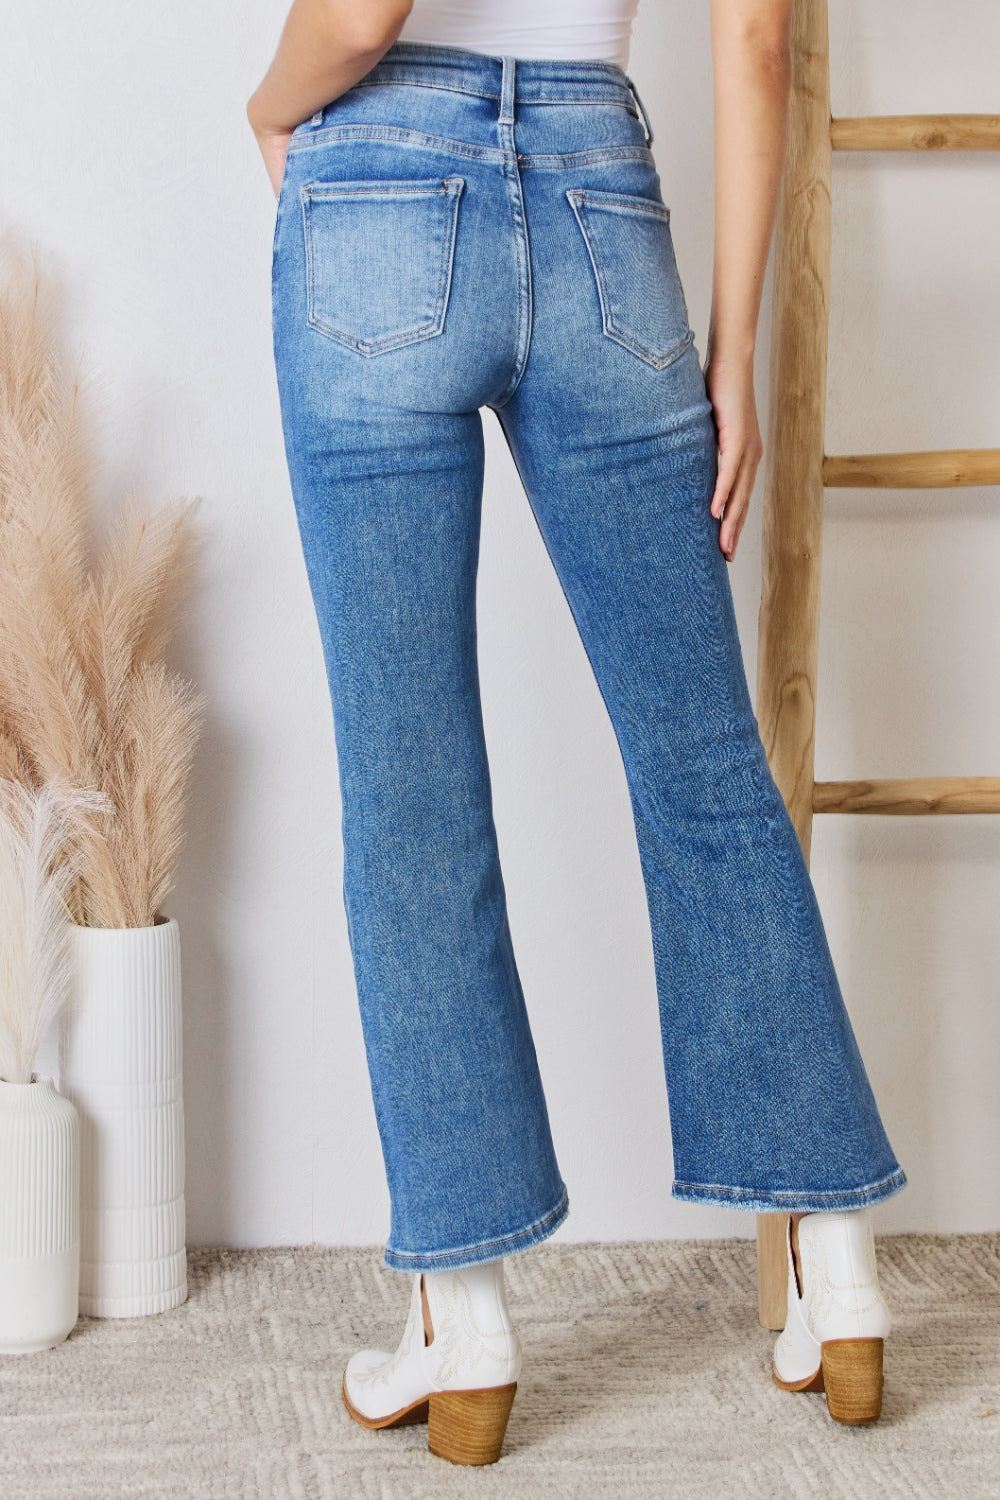 RISEN Jeans - High Rise Ankle Flare - Inspired Eye Boutique